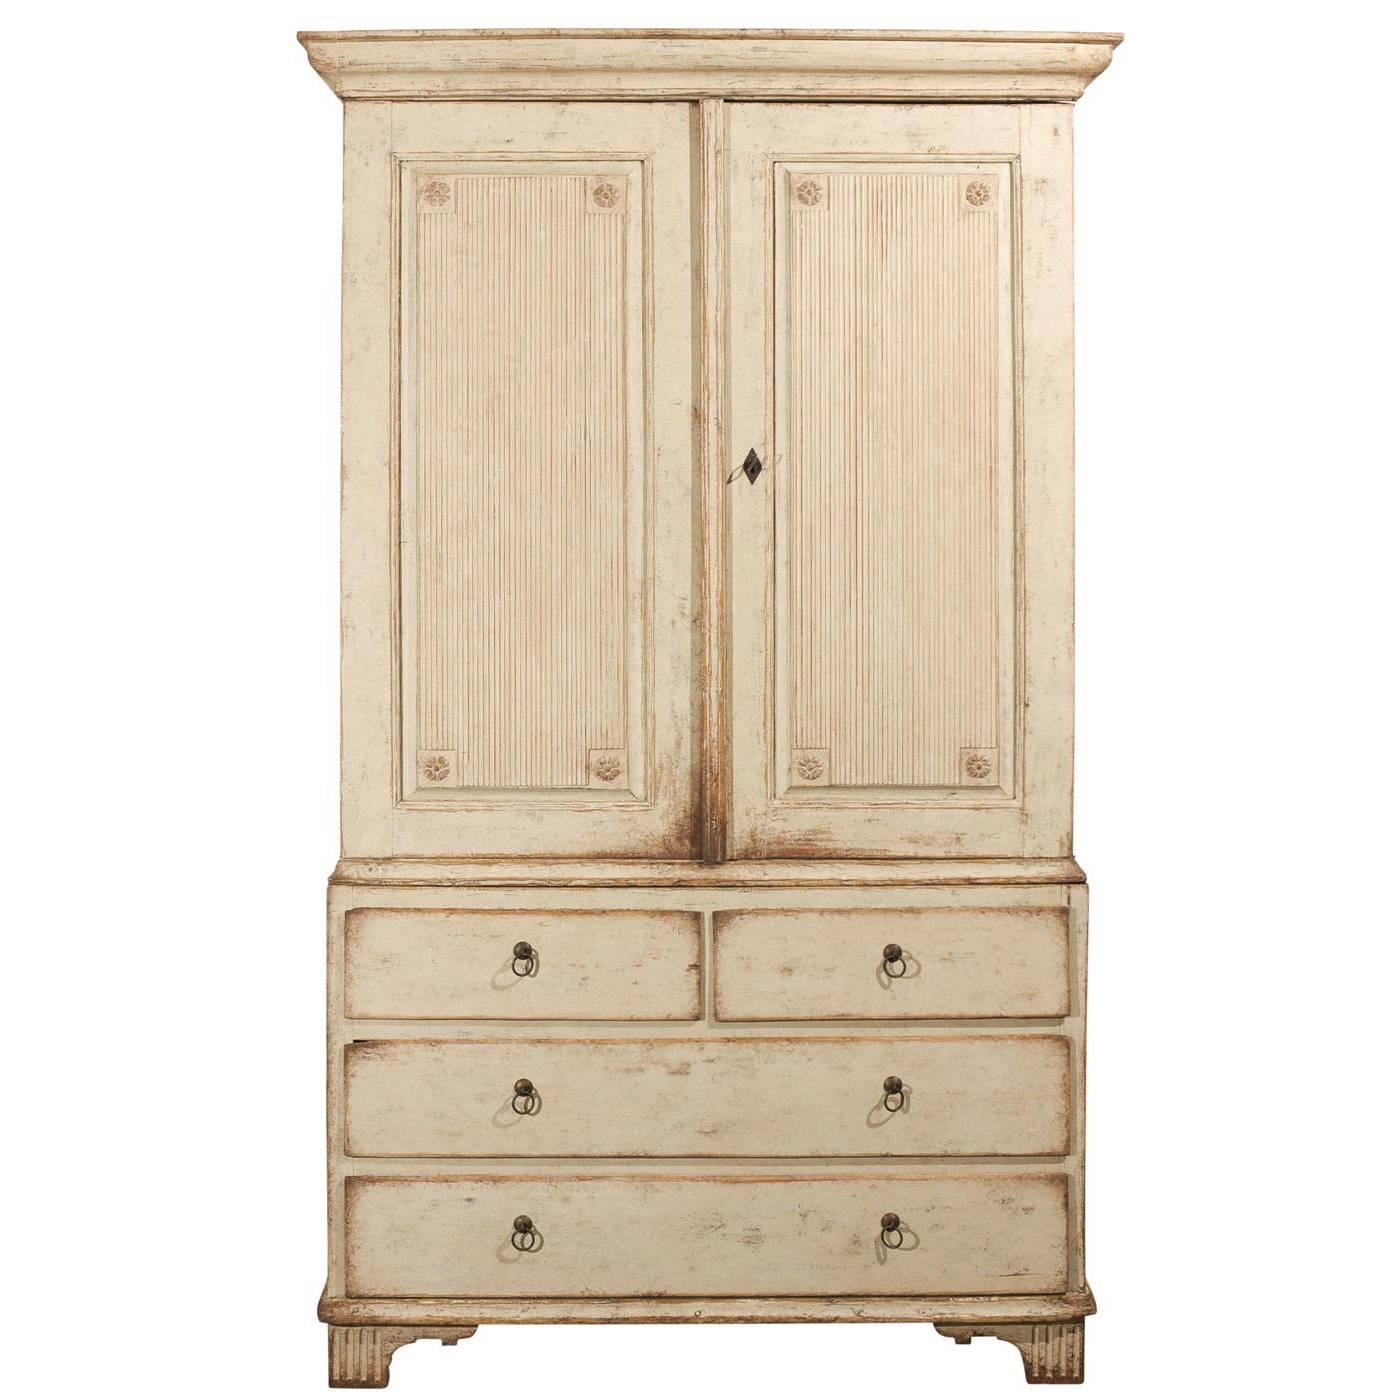 Swedish 1857 Painted Wood Linen Press with Reeded Doors and Four Drawers